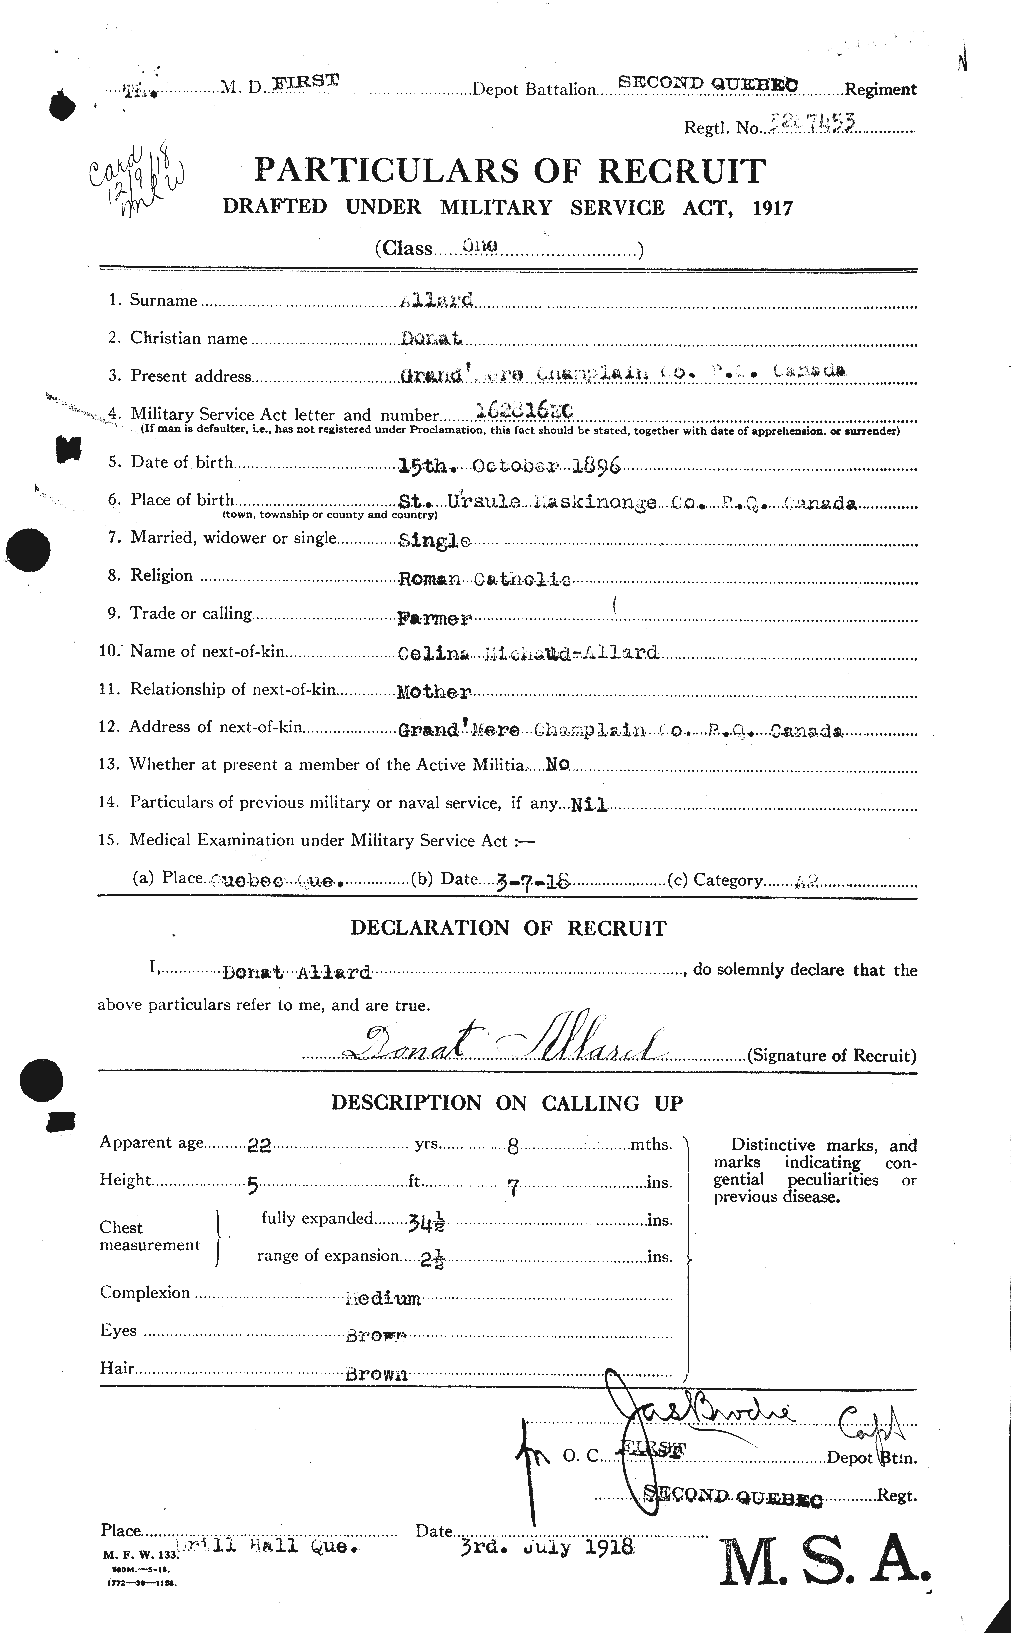 Personnel Records of the First World War - CEF 205543a